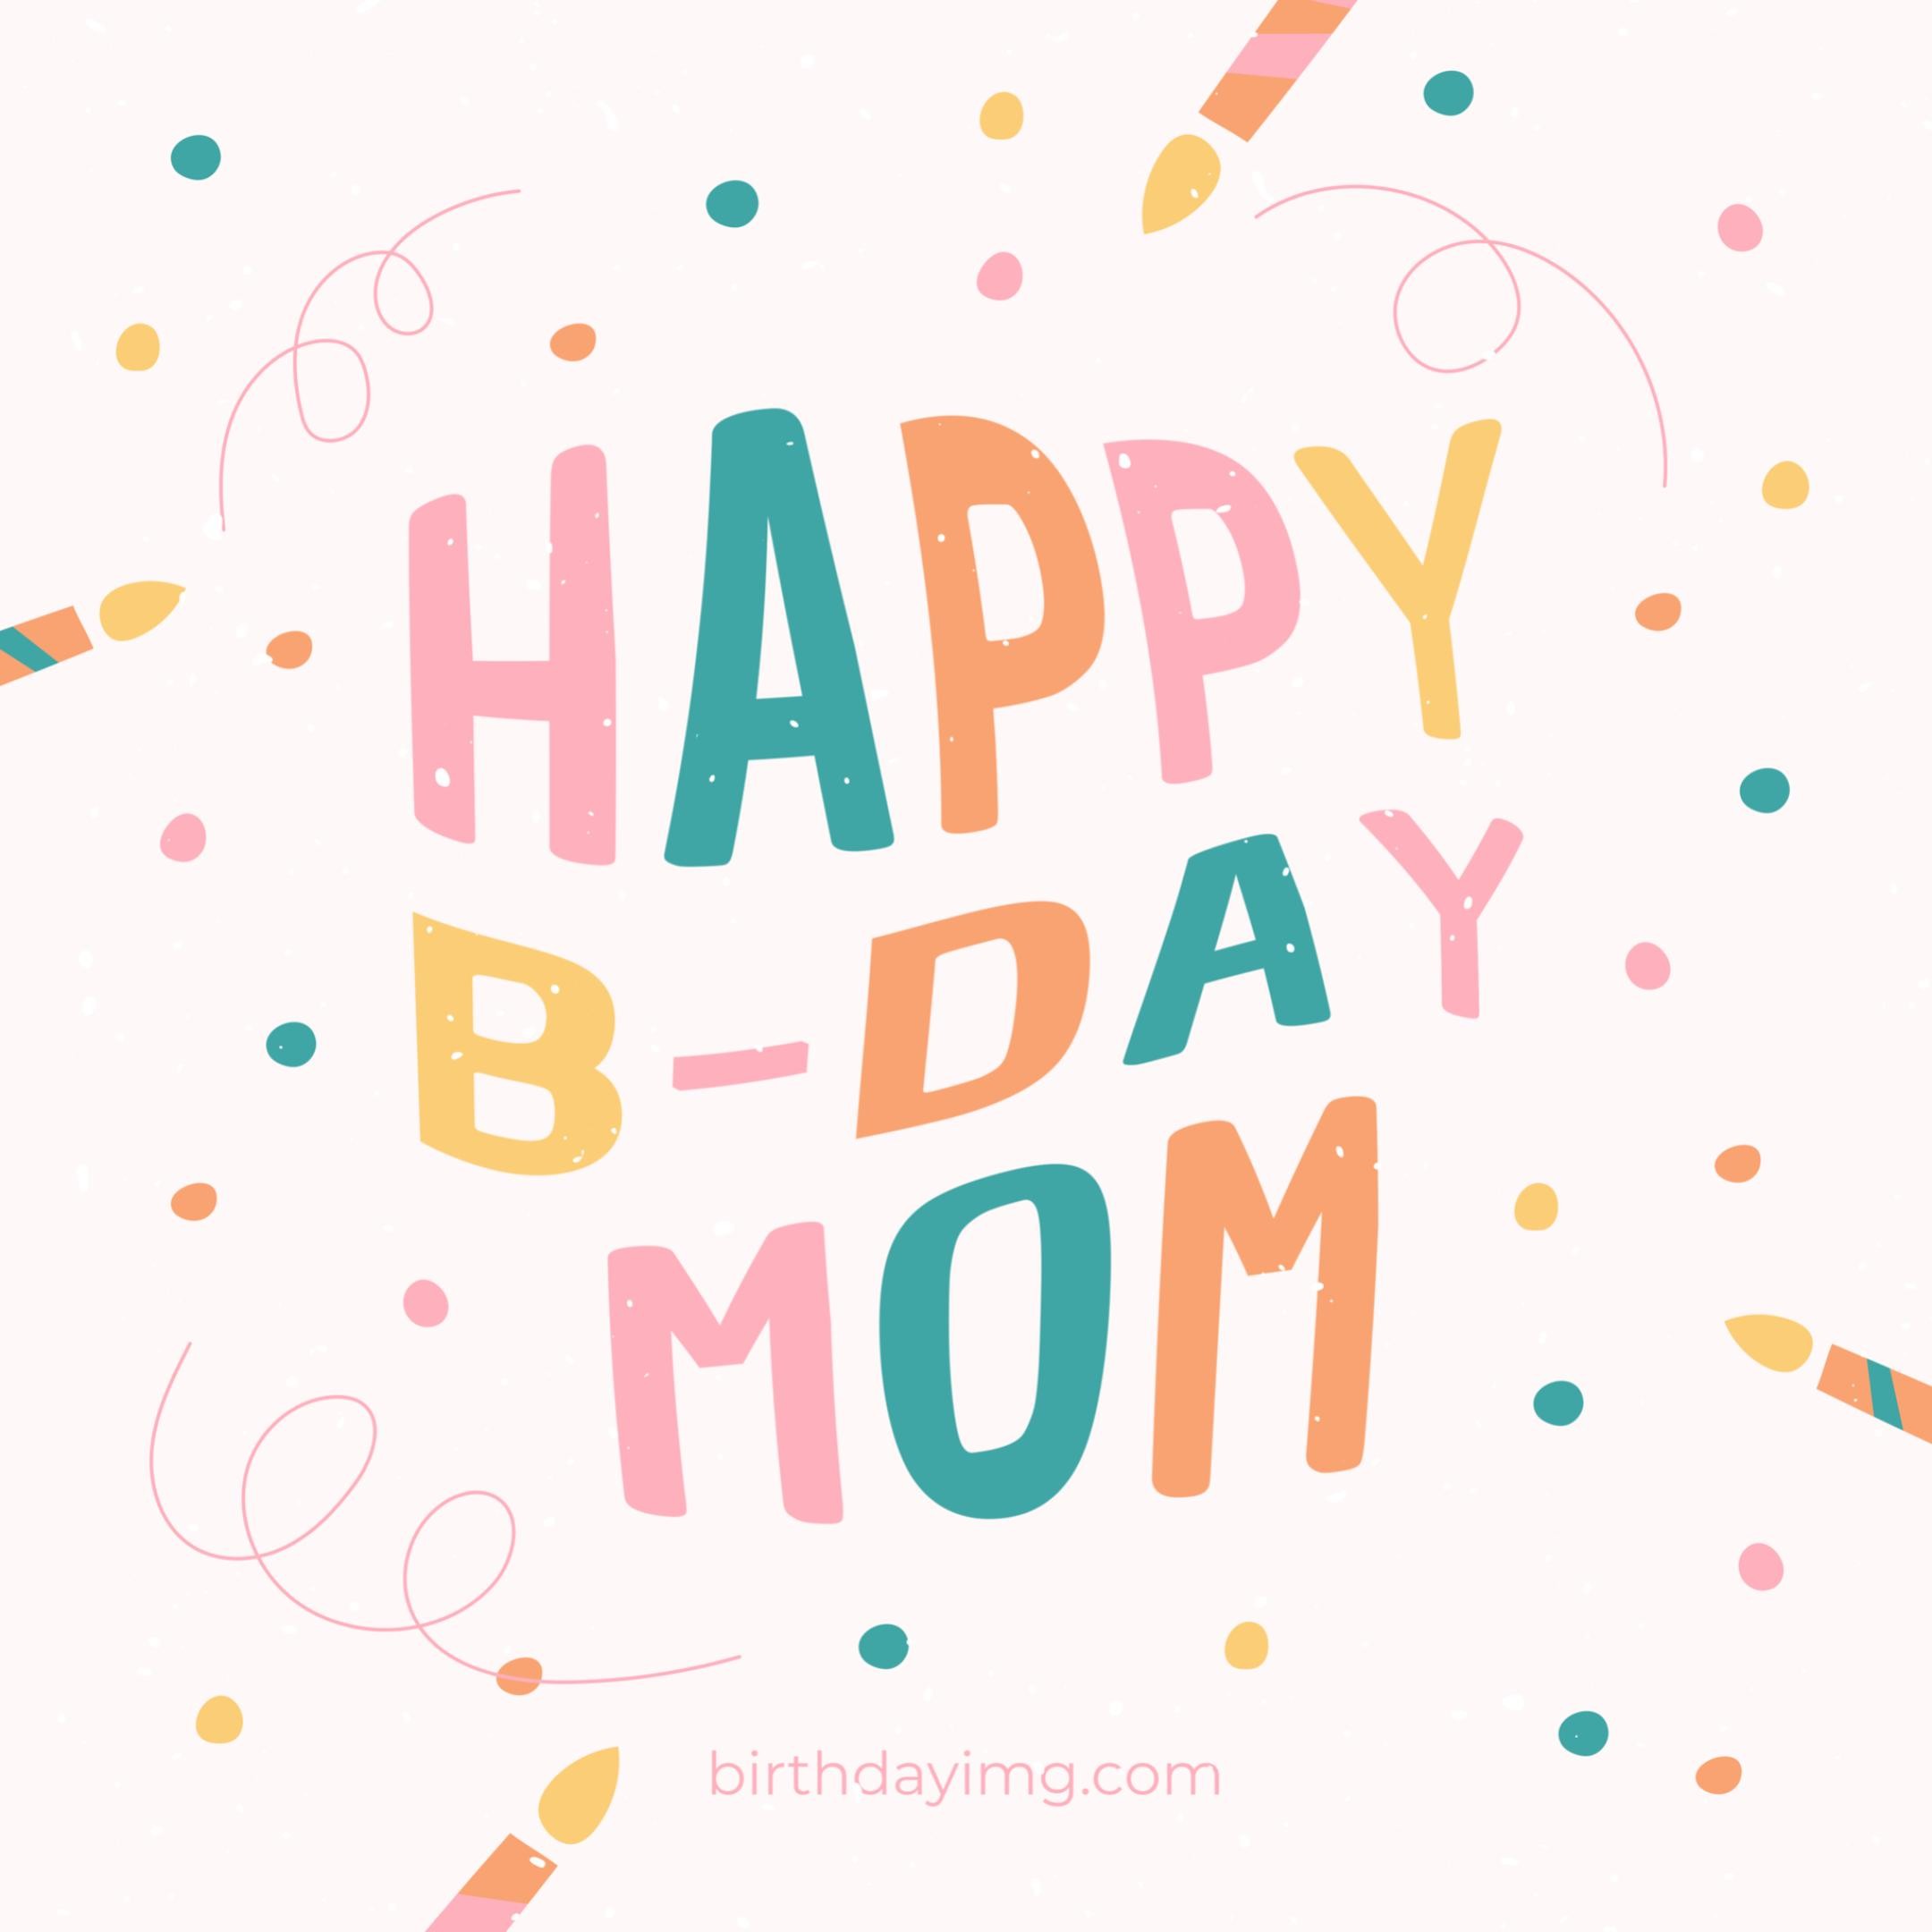 Free Happy Birthday Image For Mom With Candles - birthdayimg.com